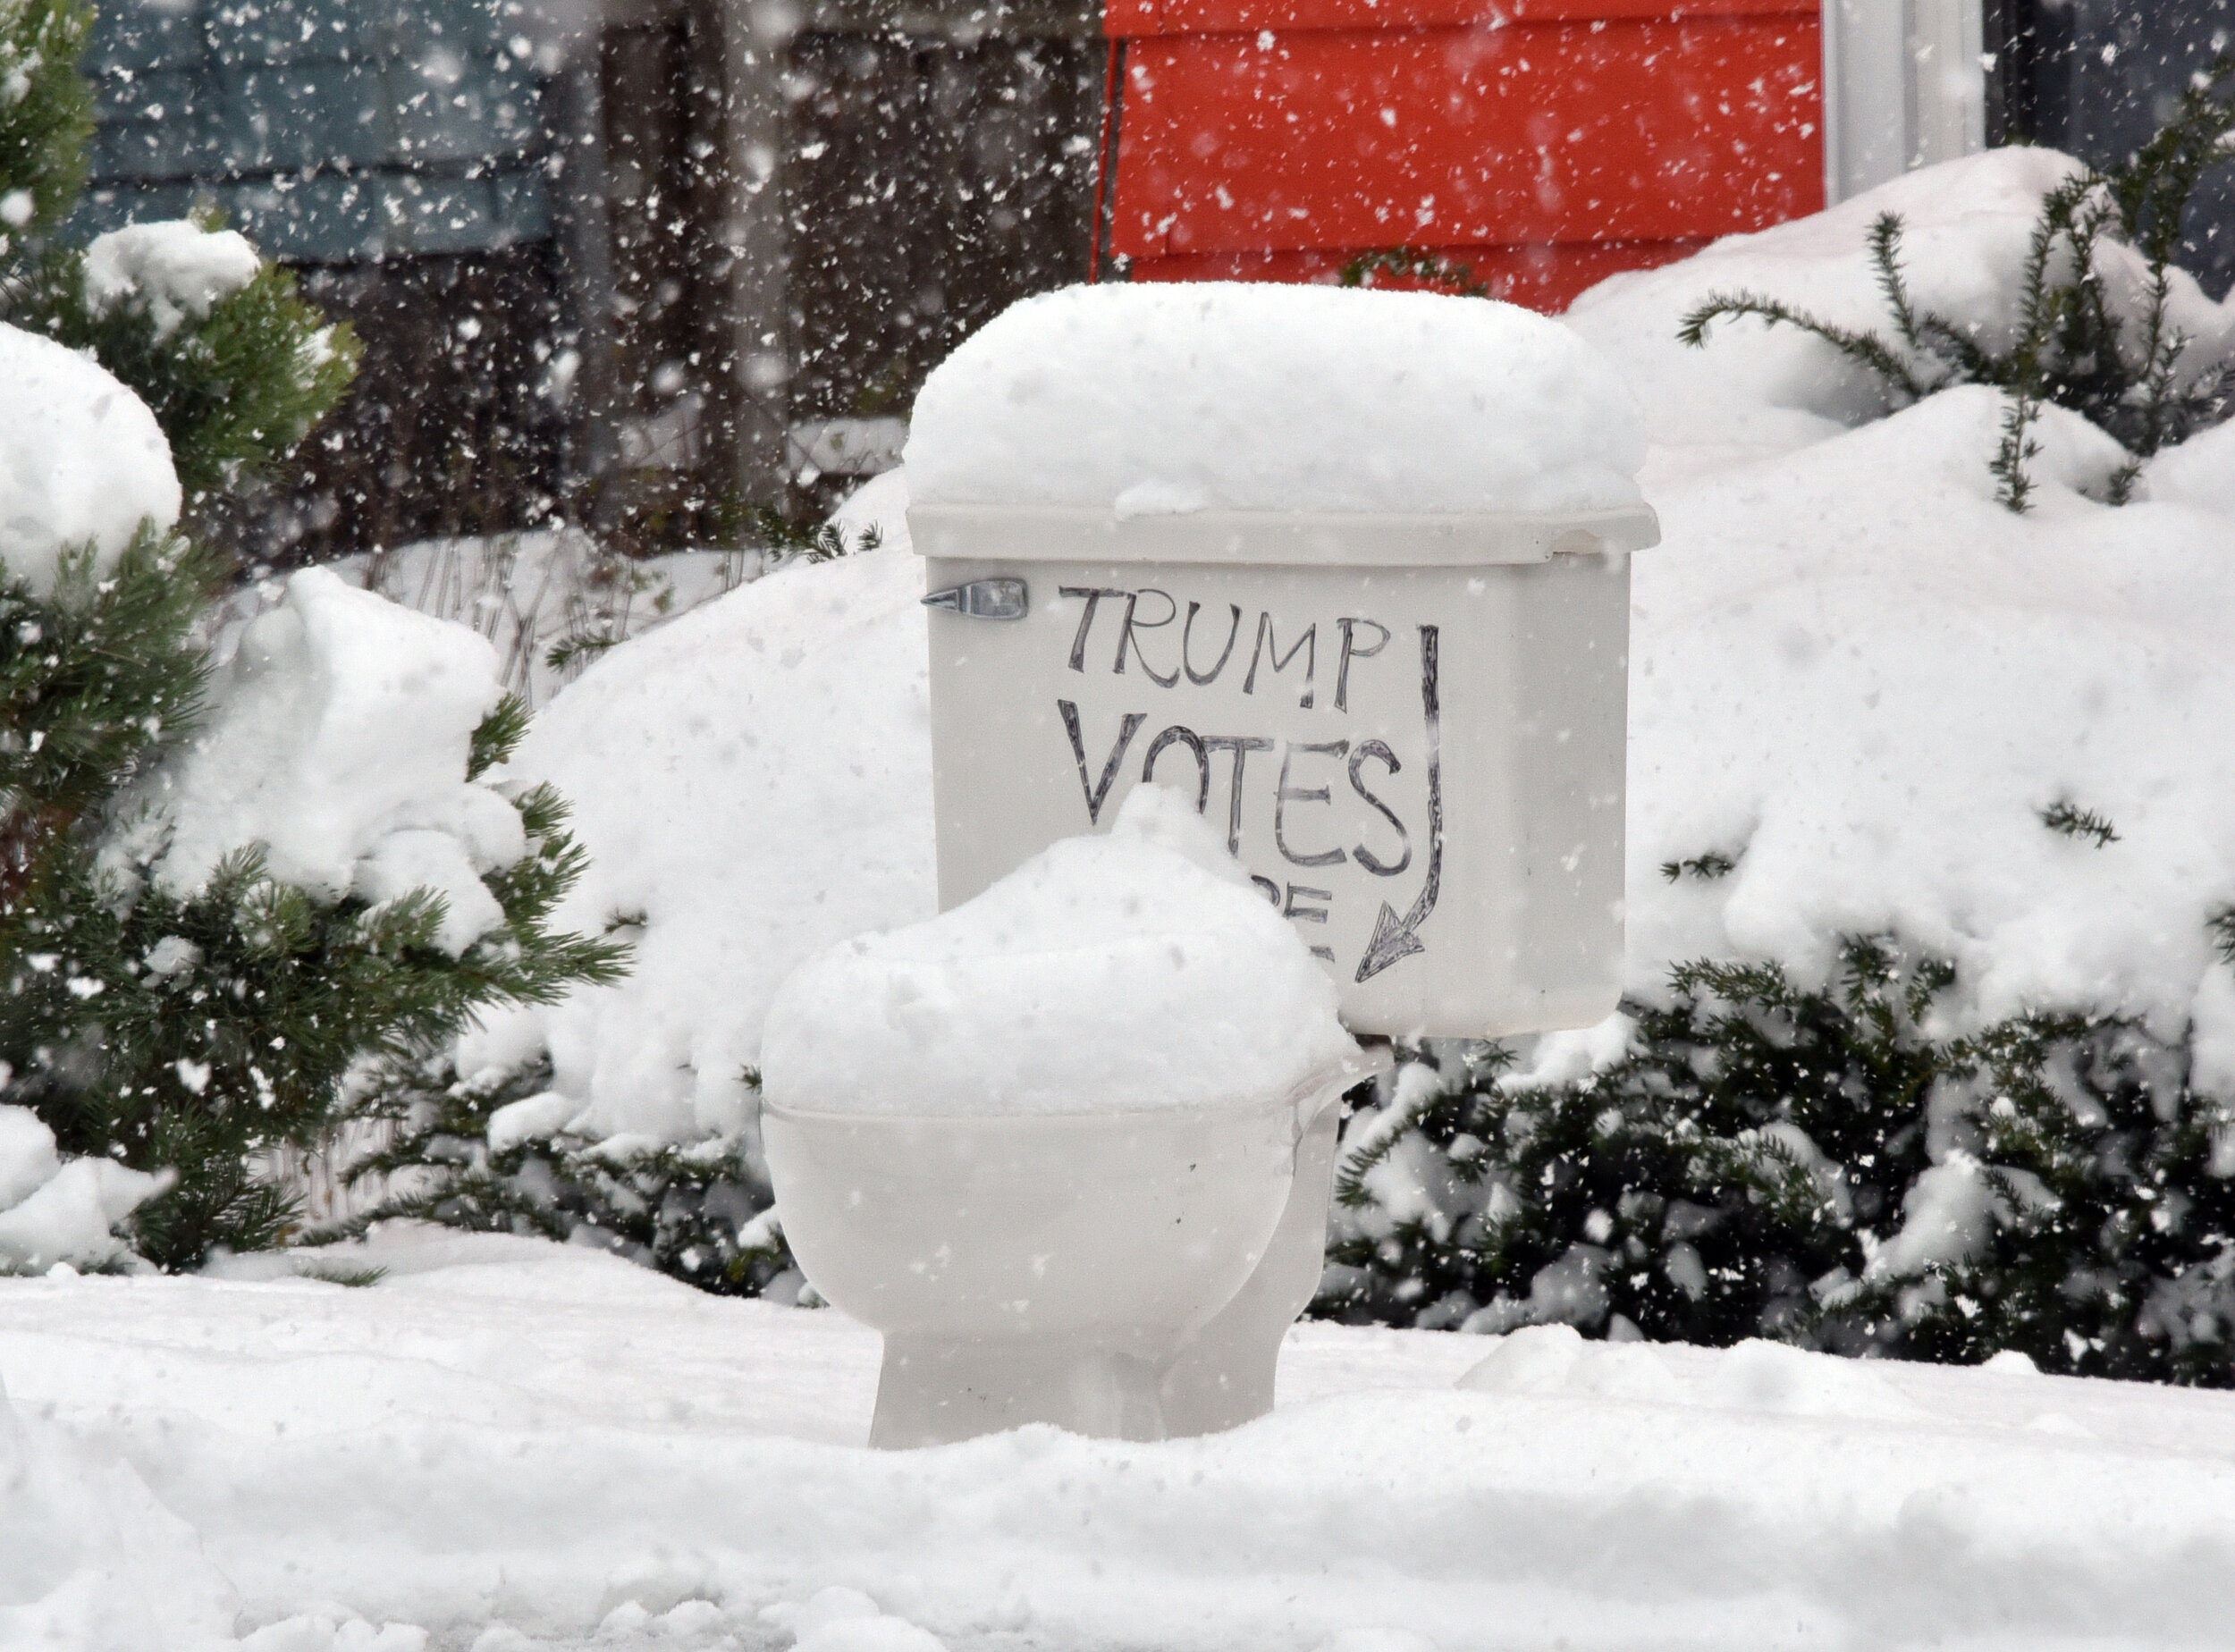   A front-yard lawn display on High Street makes an Election Day statement. Photo by Gordon Miller.  